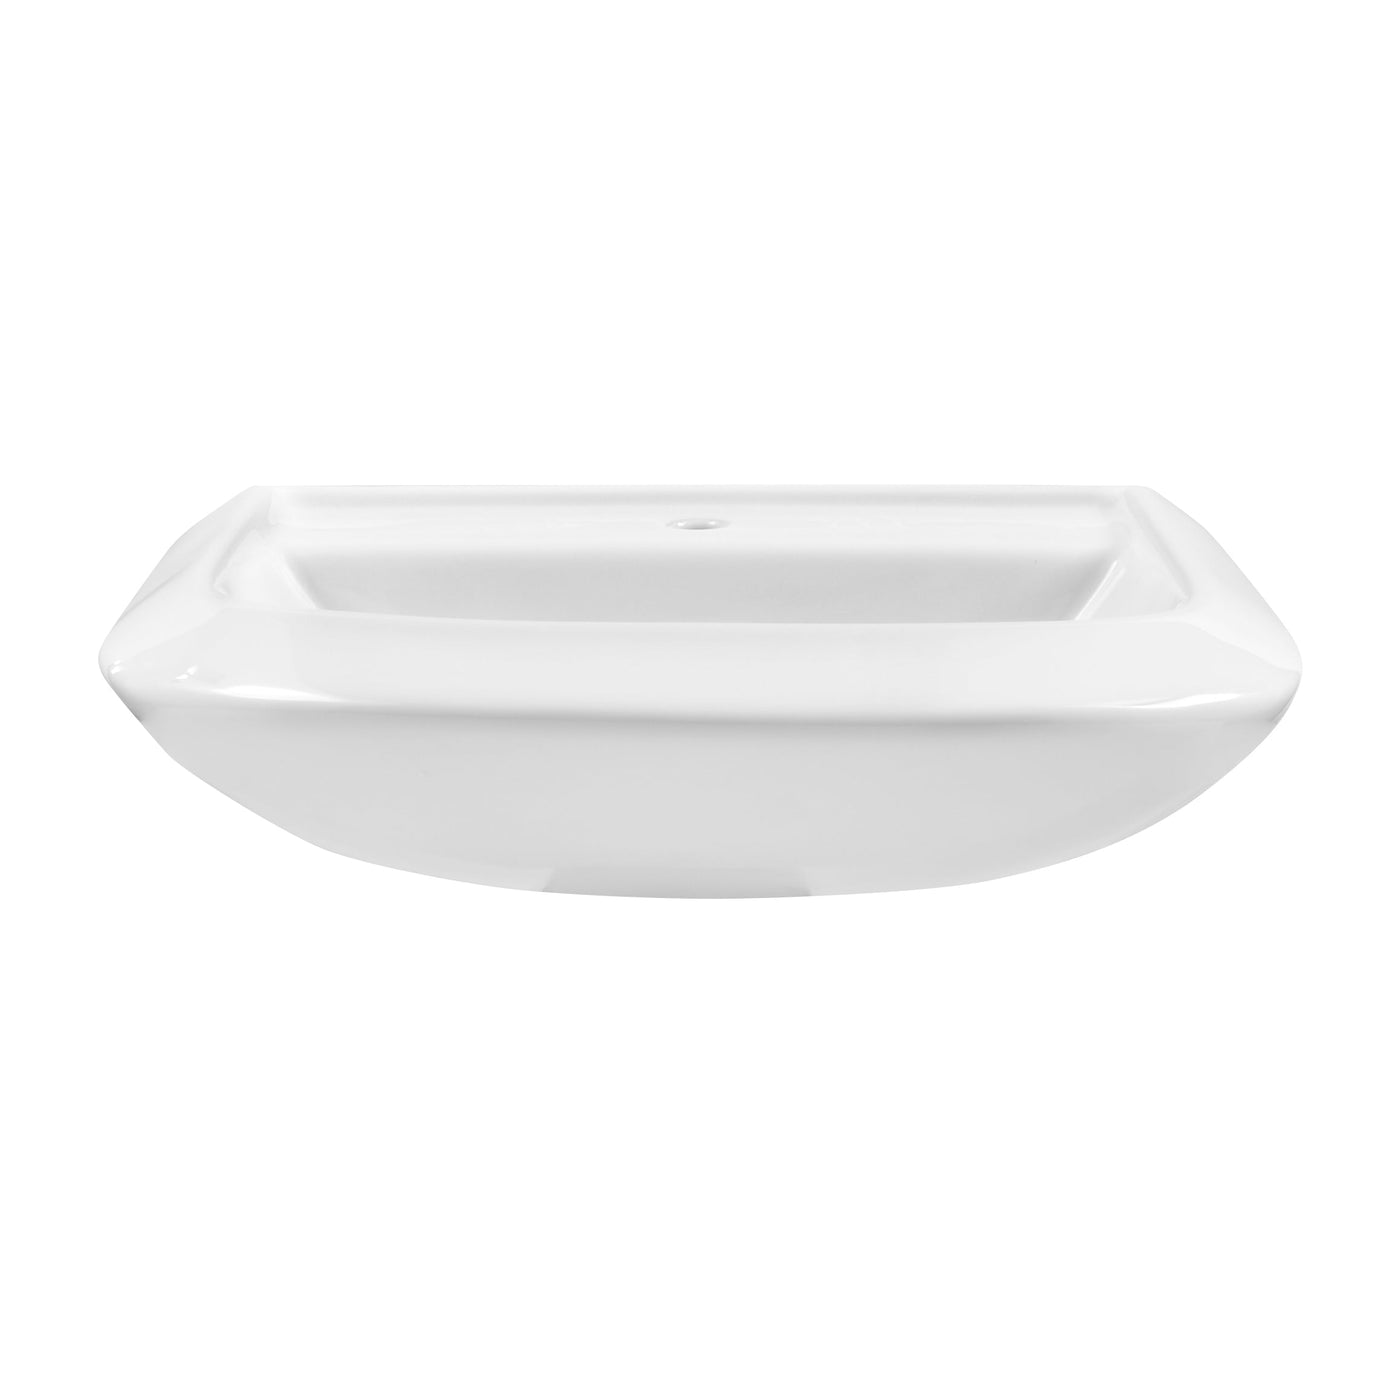 Avalanche Standard Ped Top 25"x21" Single Hole White